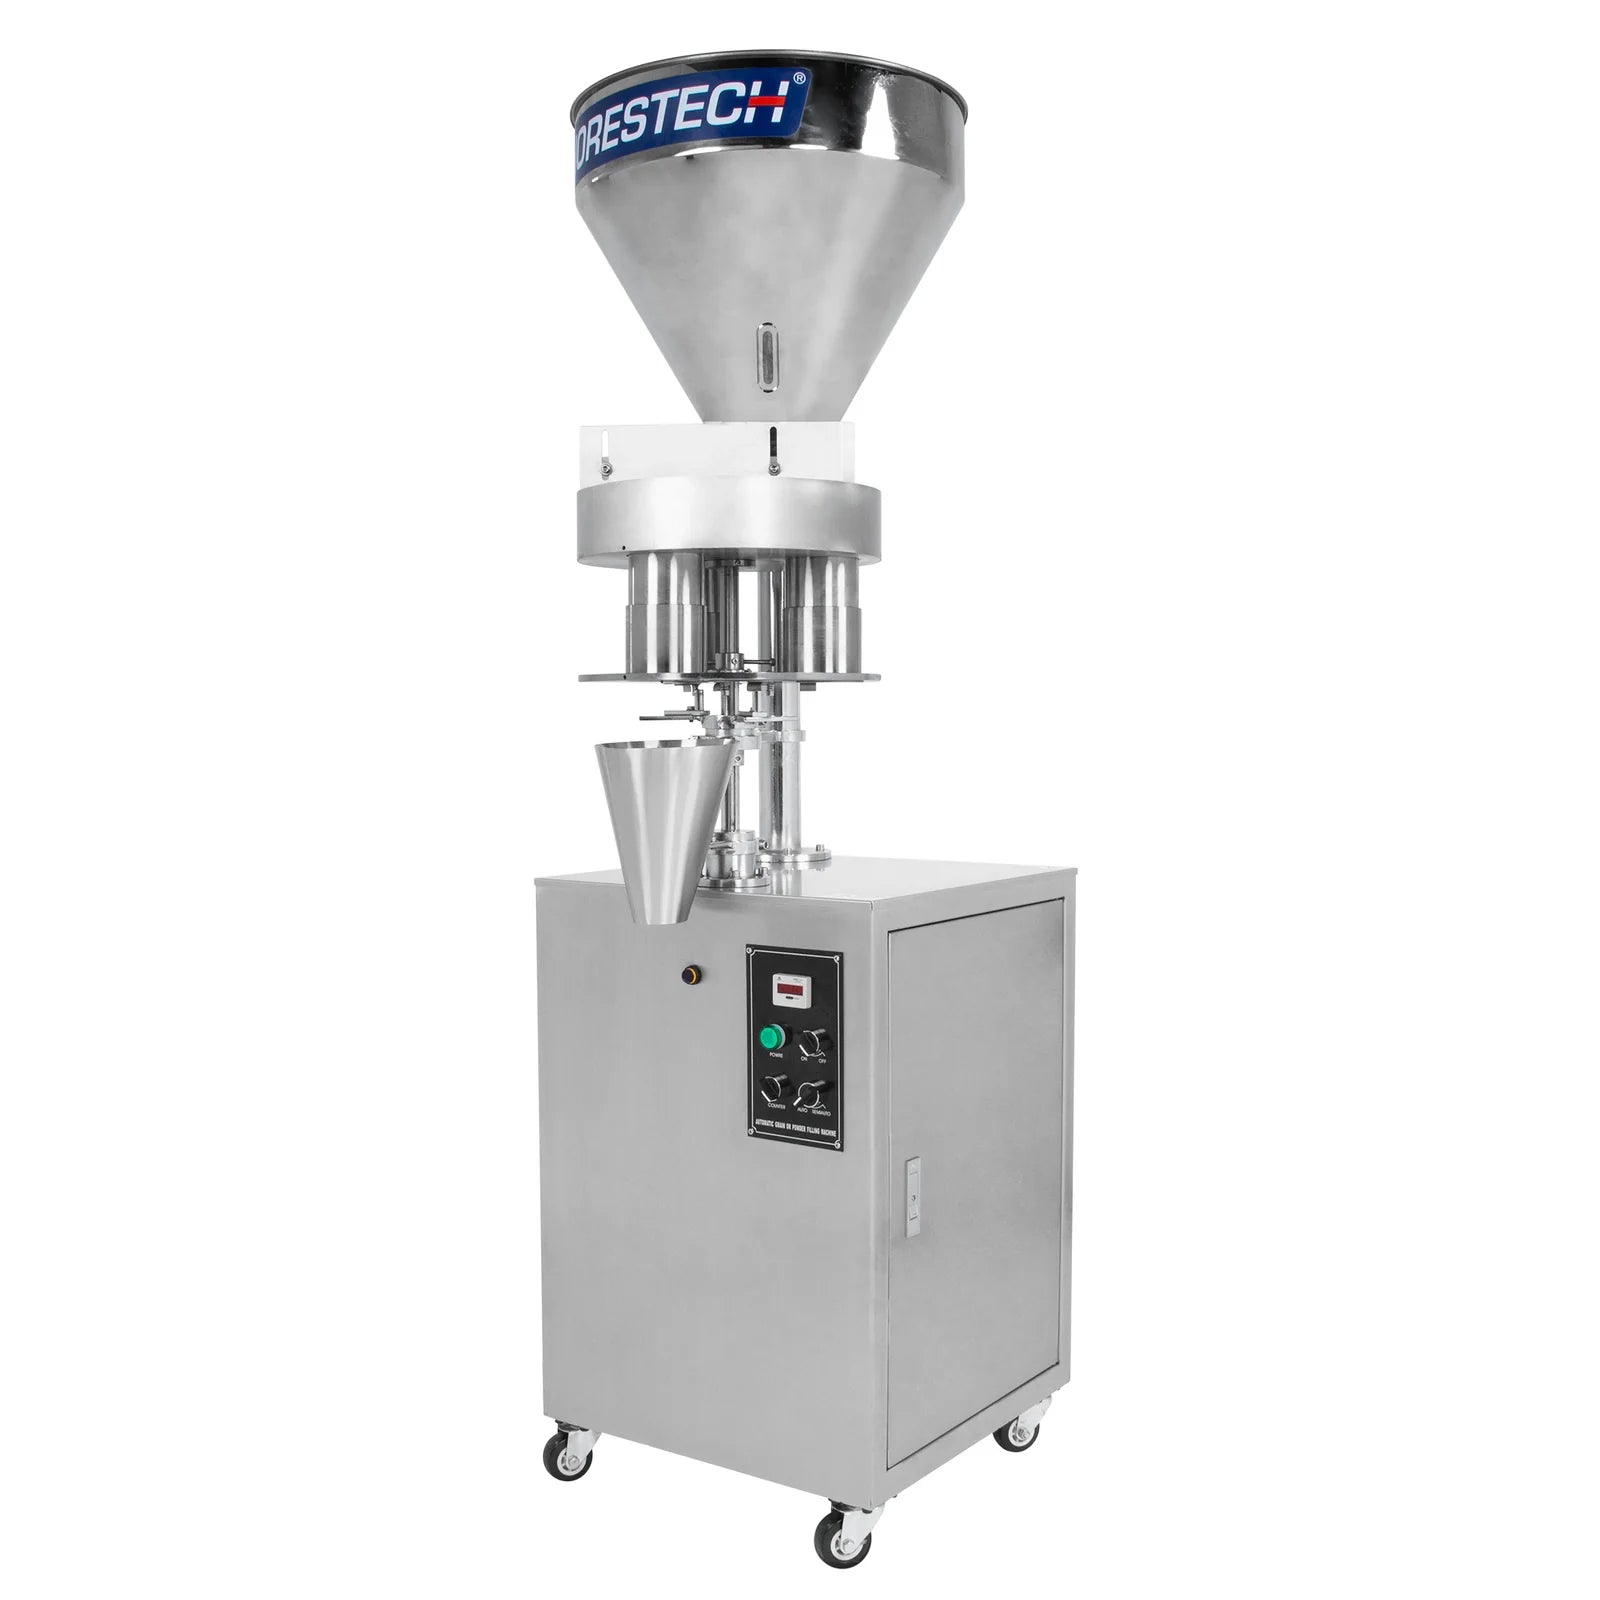 Features to Consider When Buying a Vertical Form Fill and Seal Bagging Machine